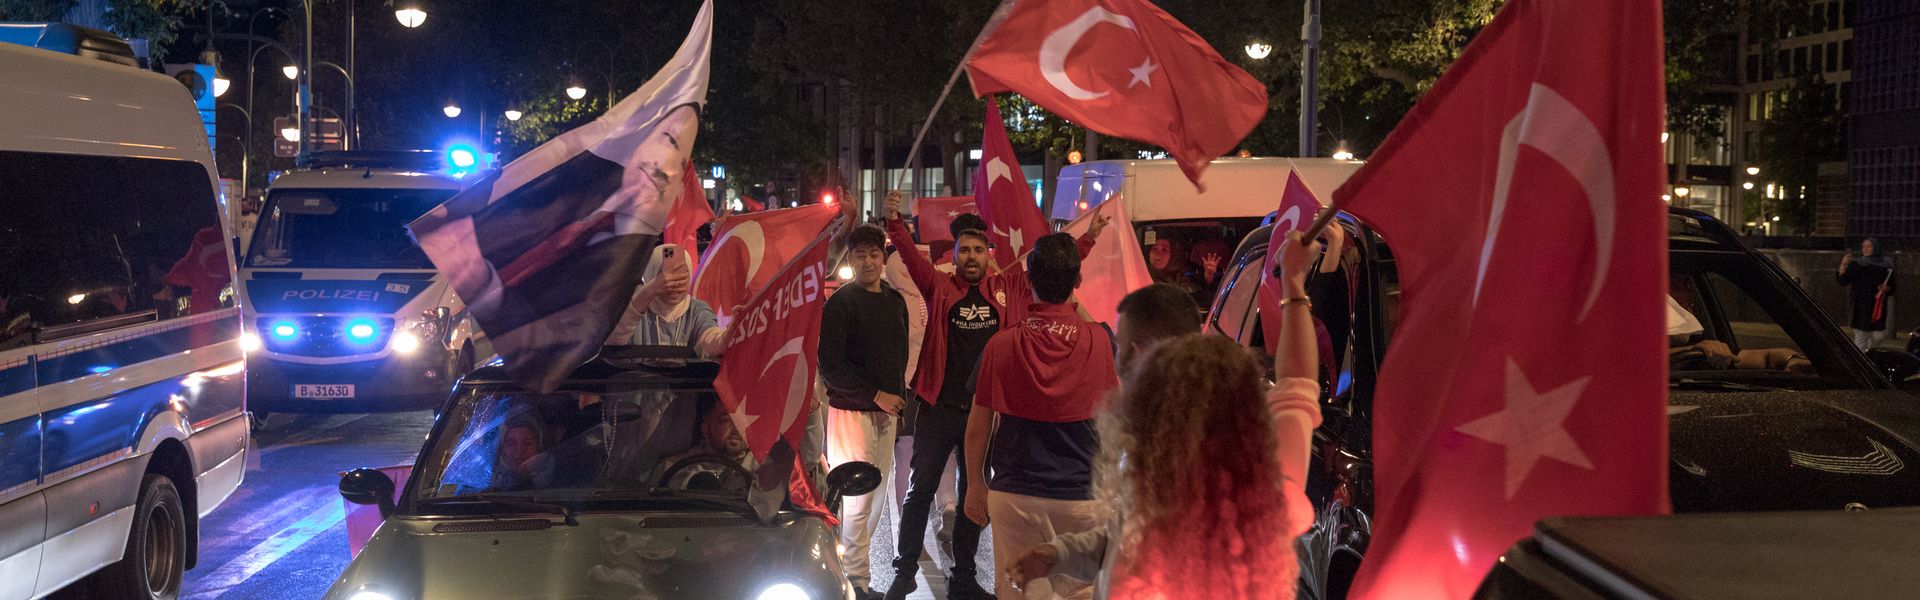 On May 28, 2023, Turkish people in Germany celebrated as Recep Tayyip Erdogan won Turkey's presidential election, extending his rule into a third decade.